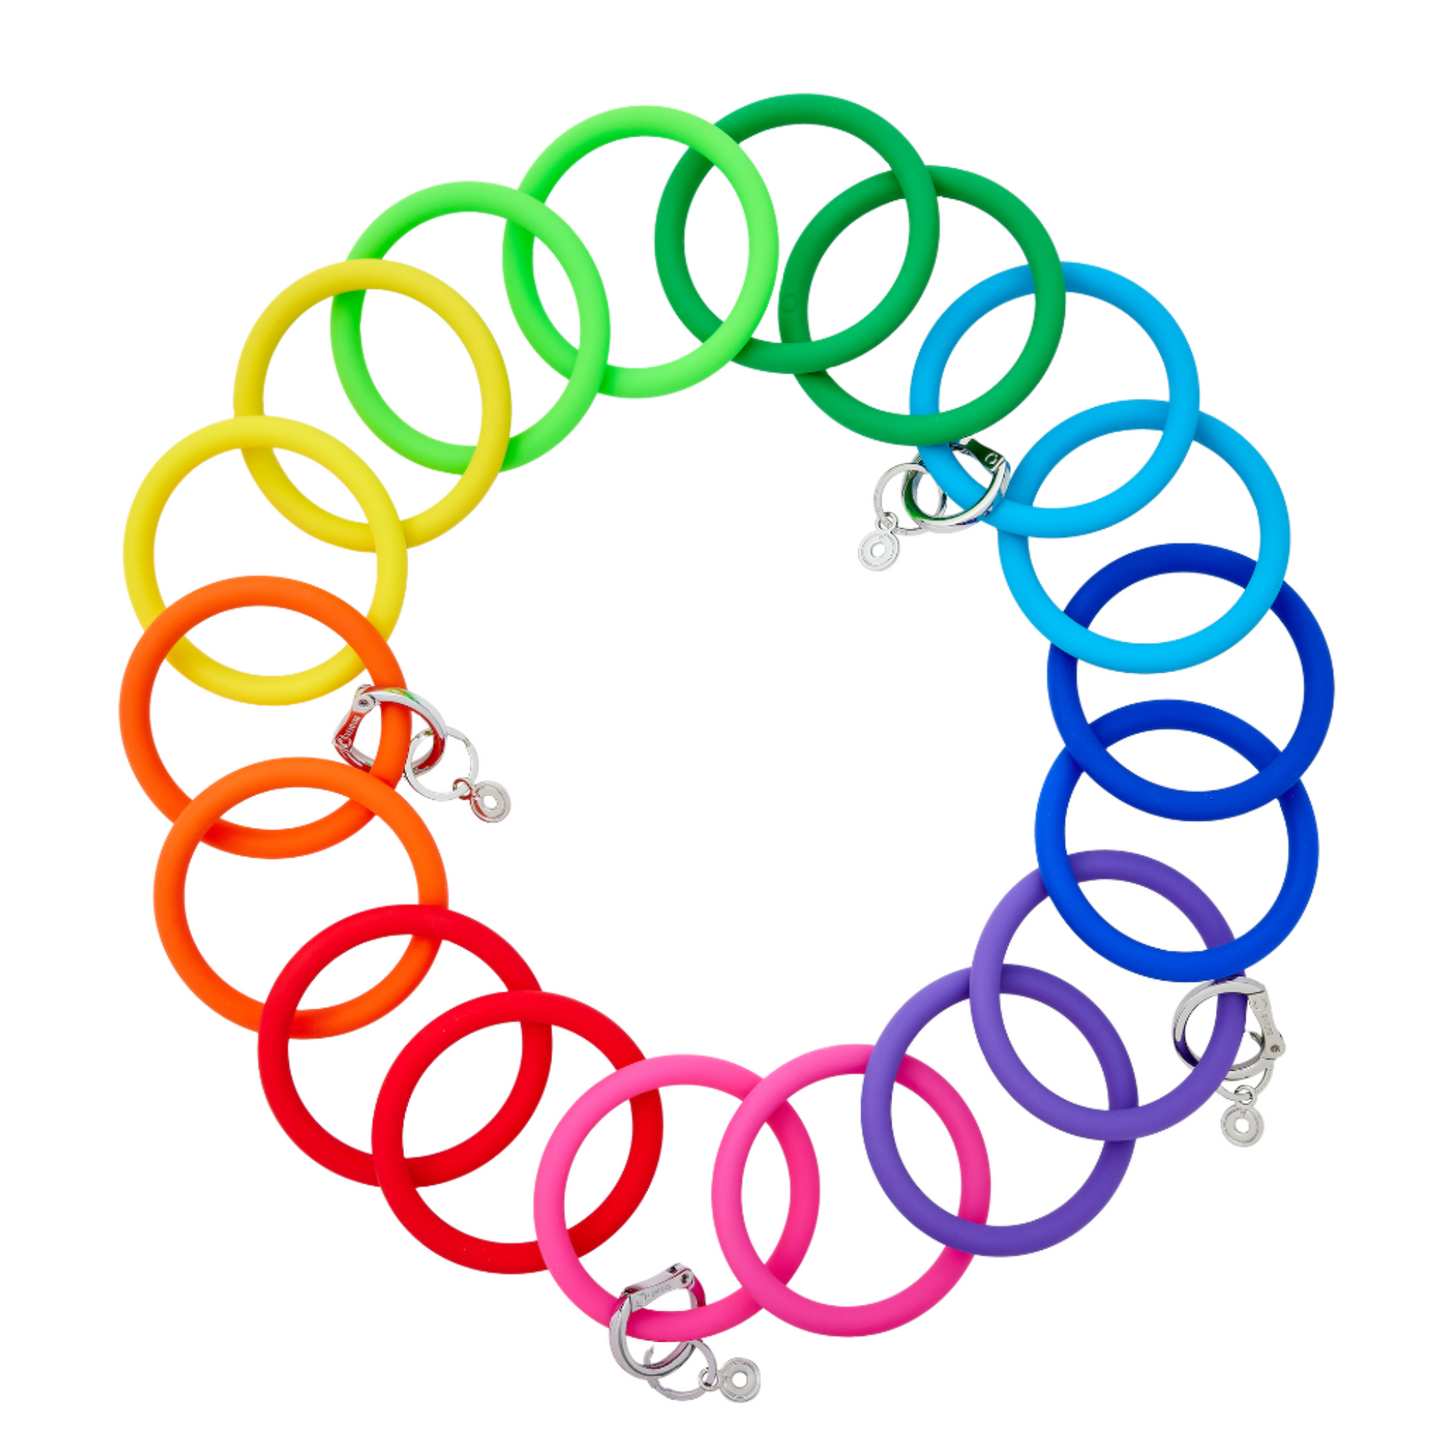 Oventure rainbow brights pre pack in all bright keyring colors that are handsfree.